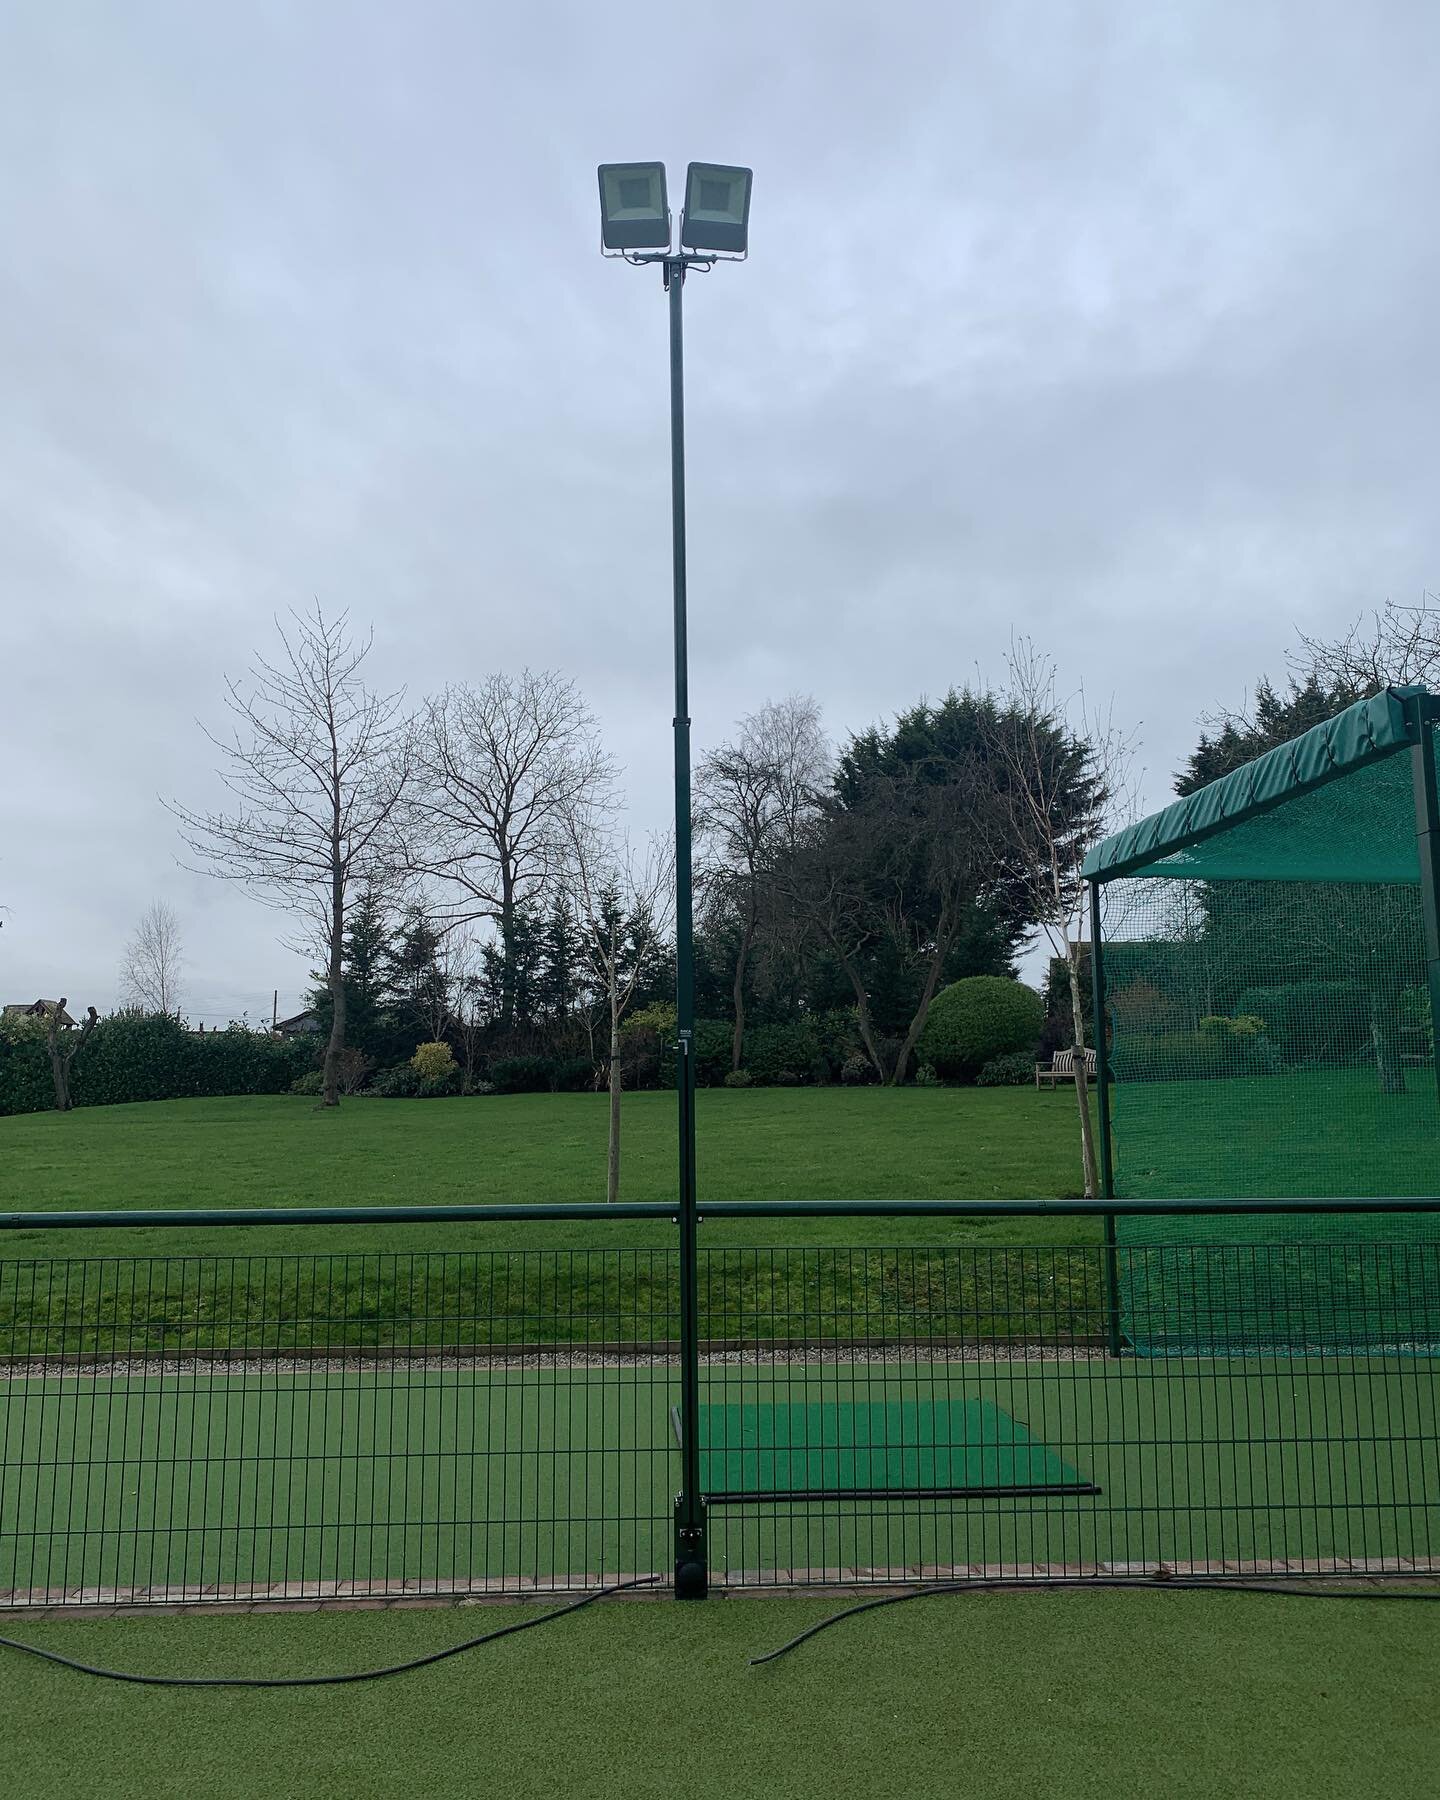 Post instalation shots of our fully retractable unit. 

Enquire today to see how we can help! https://www.dacalighting.co.uk/ 

#tennis #led #sportlight #uk